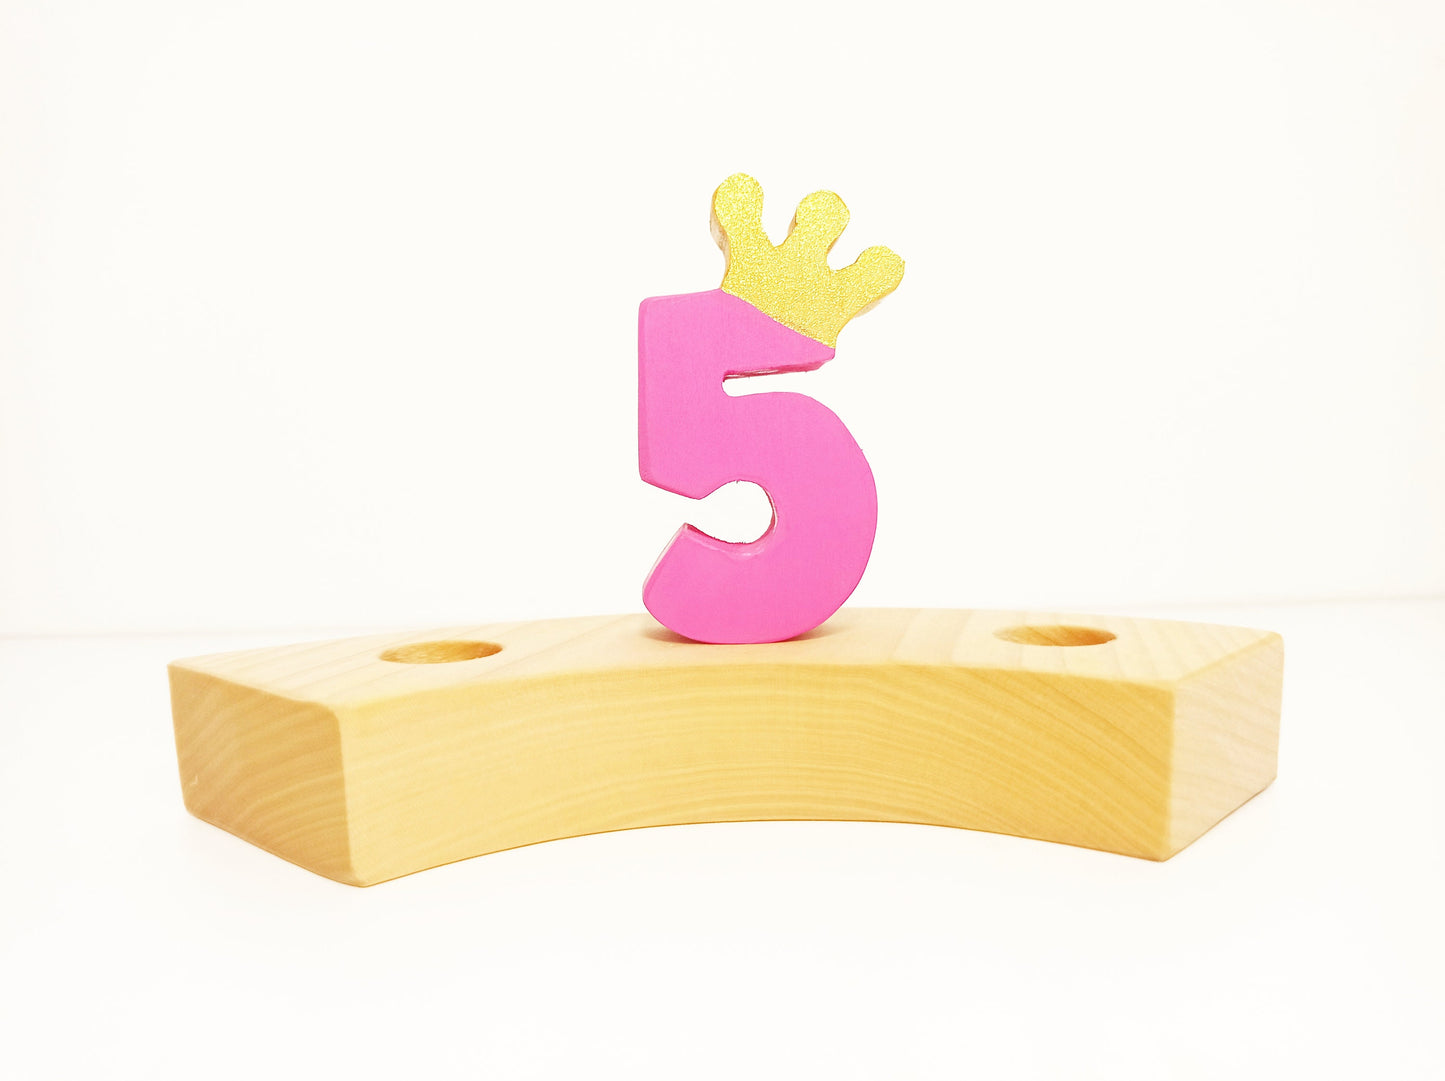 Number 5 birthday ring ornament, waldorf ring ornament, waldorf decoration, birthday ring, birthday decorations, waldorf numbers, jaar ring